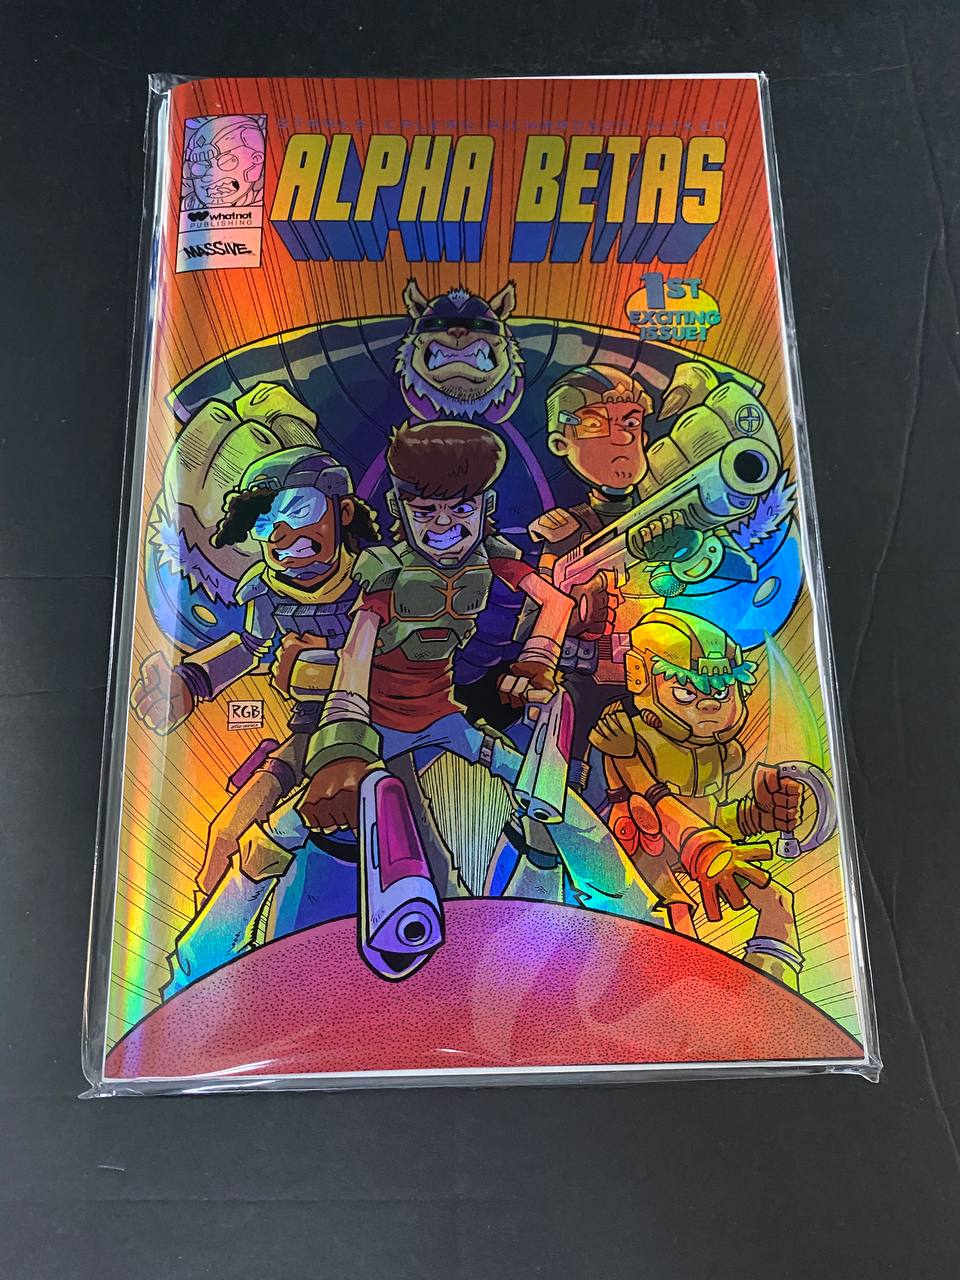 ALPHA BETAS #1 - NYCC PHARCYDE EXCLUSIVE FOIL LTD 100 (FREE 1:10 W/ PURCHASE)